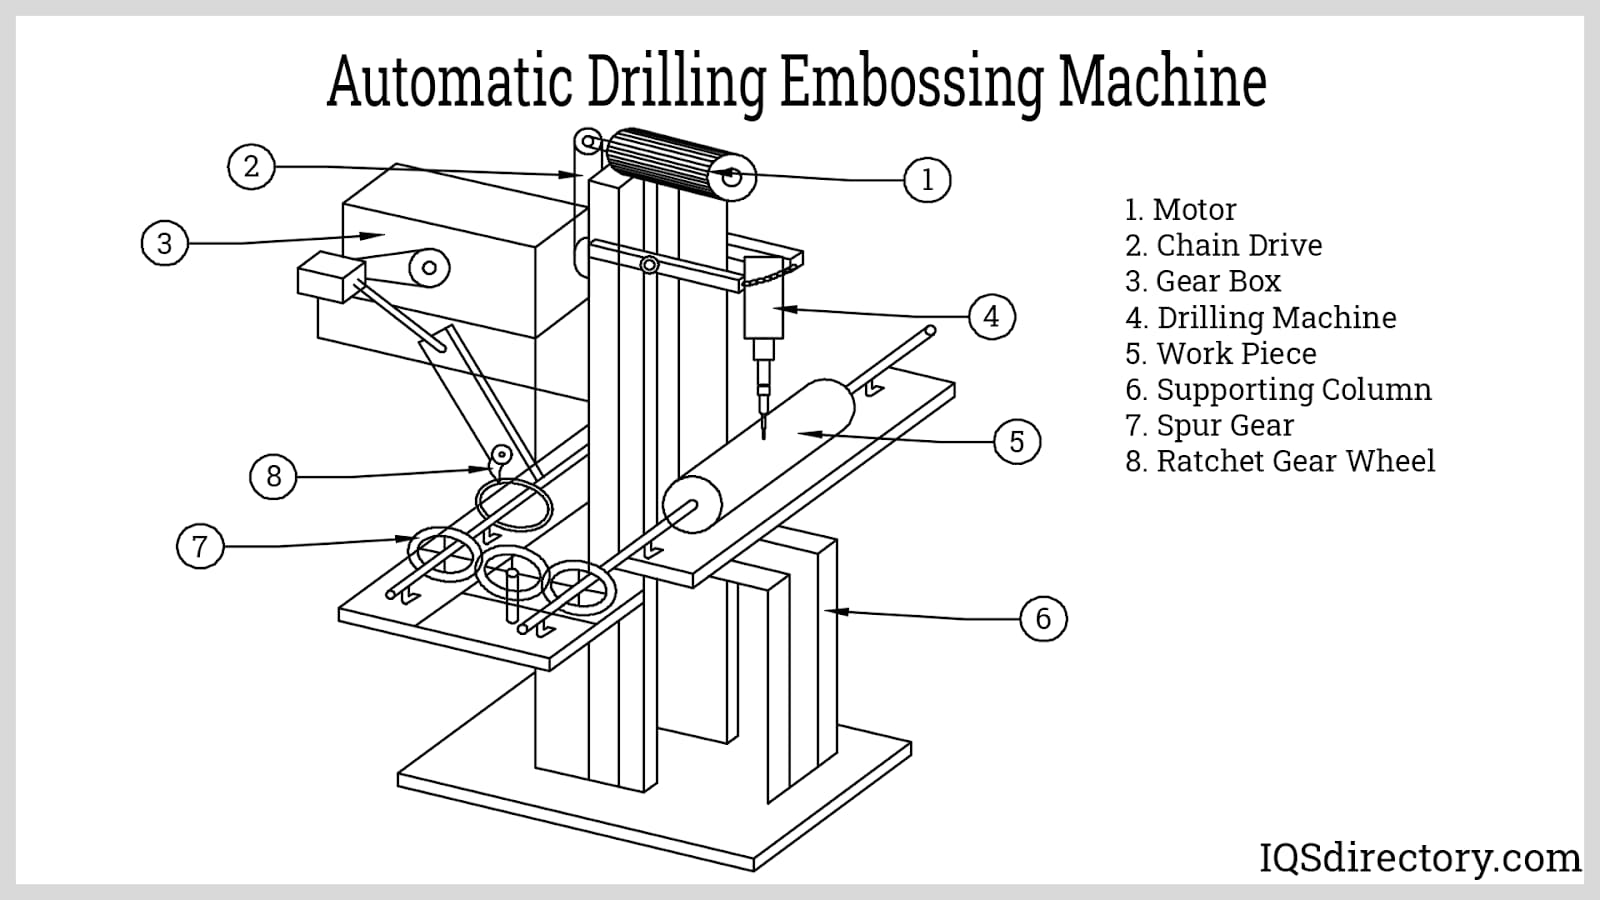 Automatic Drilling Embossing Machine